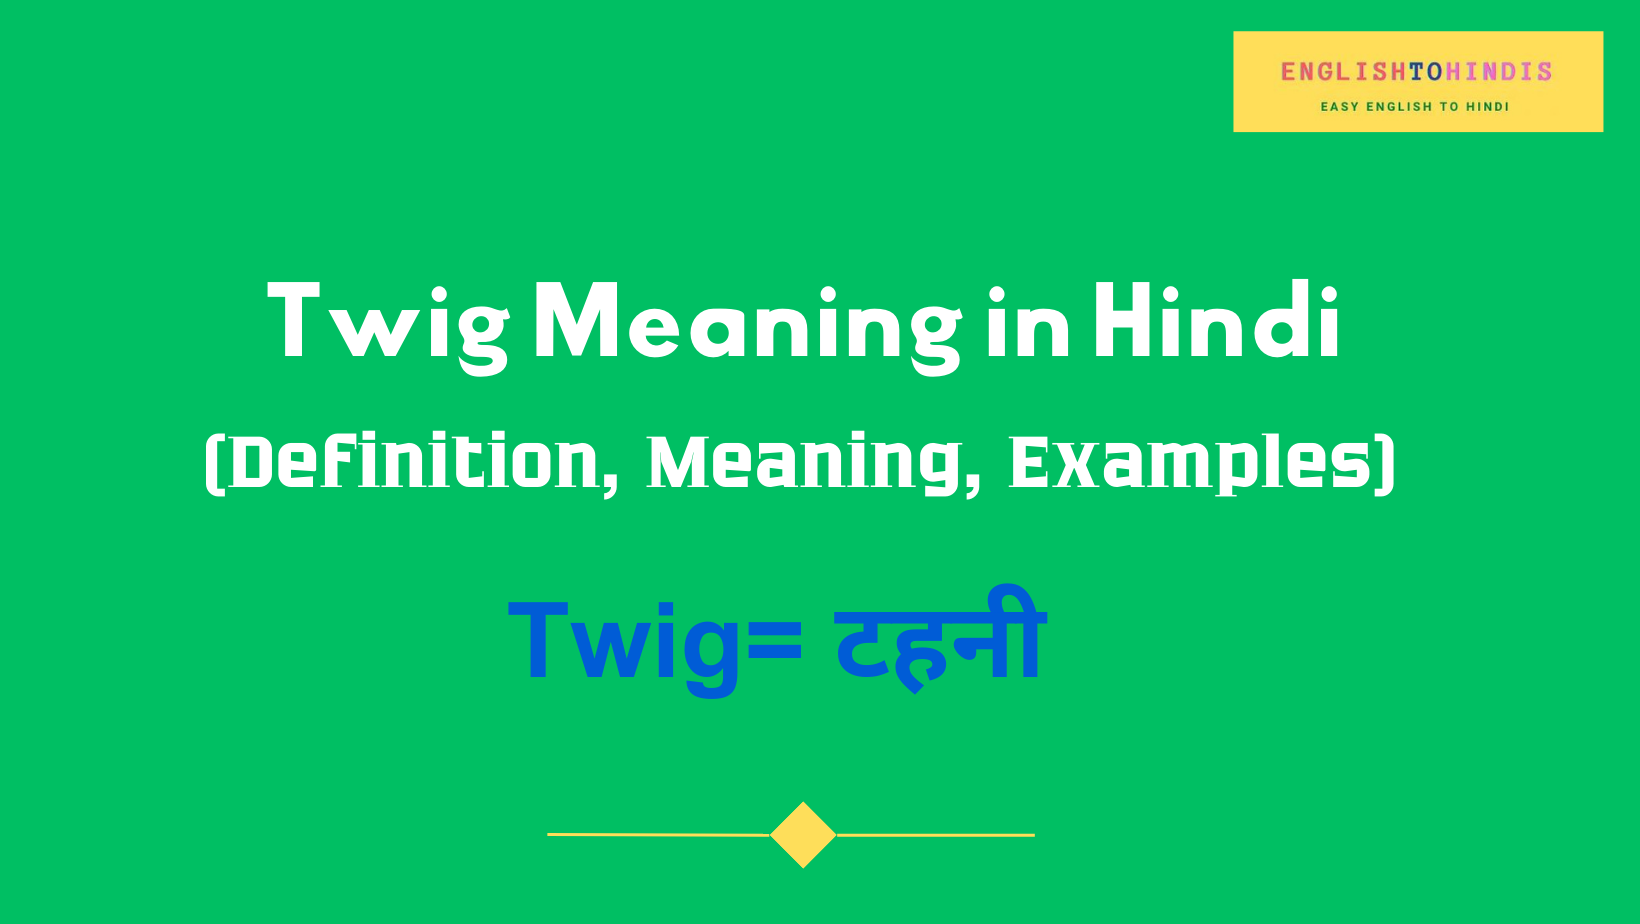 Twig meaning in Hindi